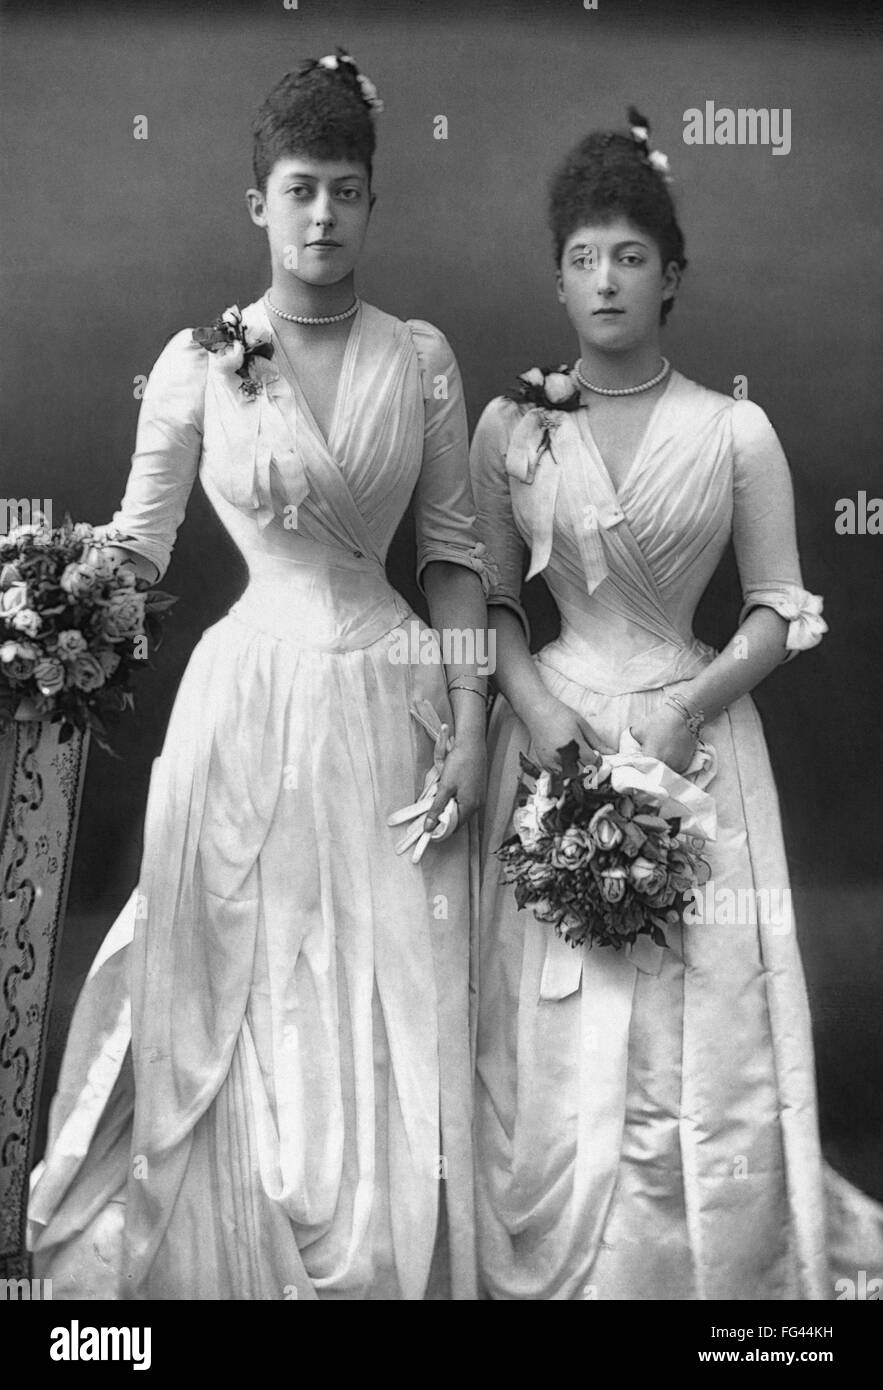 PRINCESSES OF WALES, c1890. /nPrincess Victoria and Princess Maud of Wales, the future Queen of Norway. Photograph by W. & D. Downey, c1890. Stock Photo